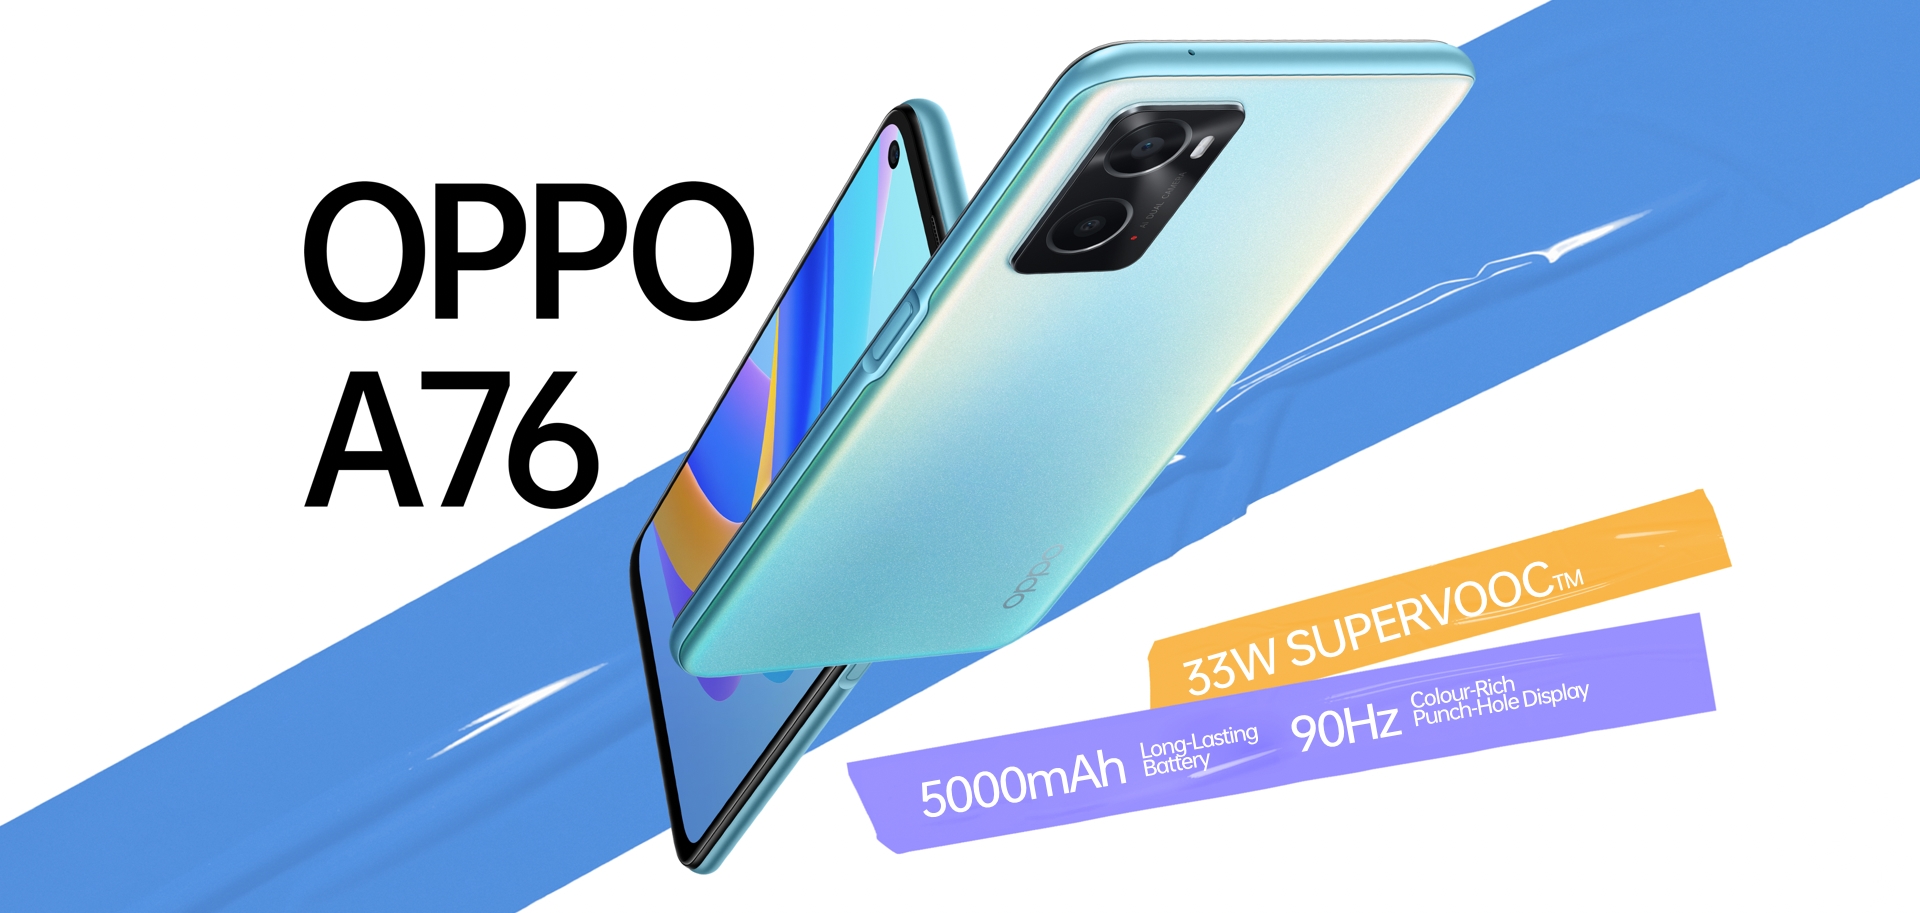 OPPO A76 4G: 90Hz screen, Snapdragon 680 chip, IP54 protection and 5000 mAh battery for $215